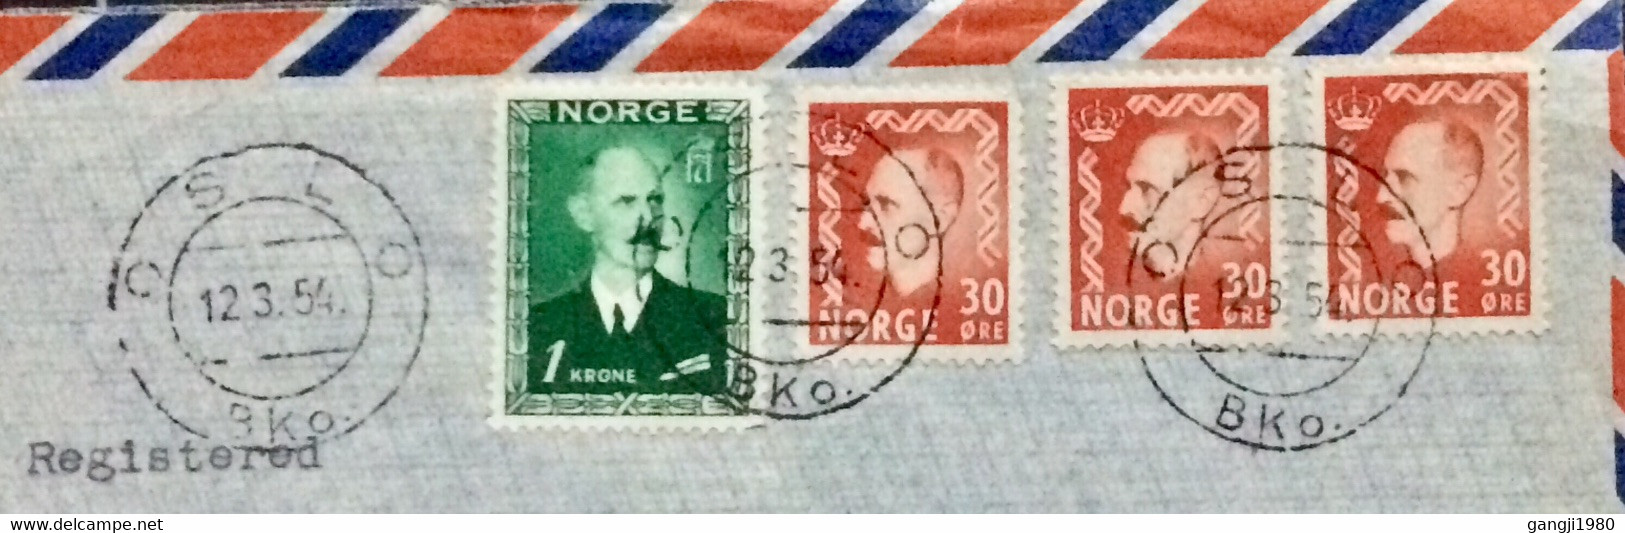 NORWAY 1954, PRIVATE COVER “EIDE” FIRM, USED TO USA,KING HARKON 4 STAMPS, REGISTER OSLO & DETROIT CITY CANCEL. - Brieven En Documenten